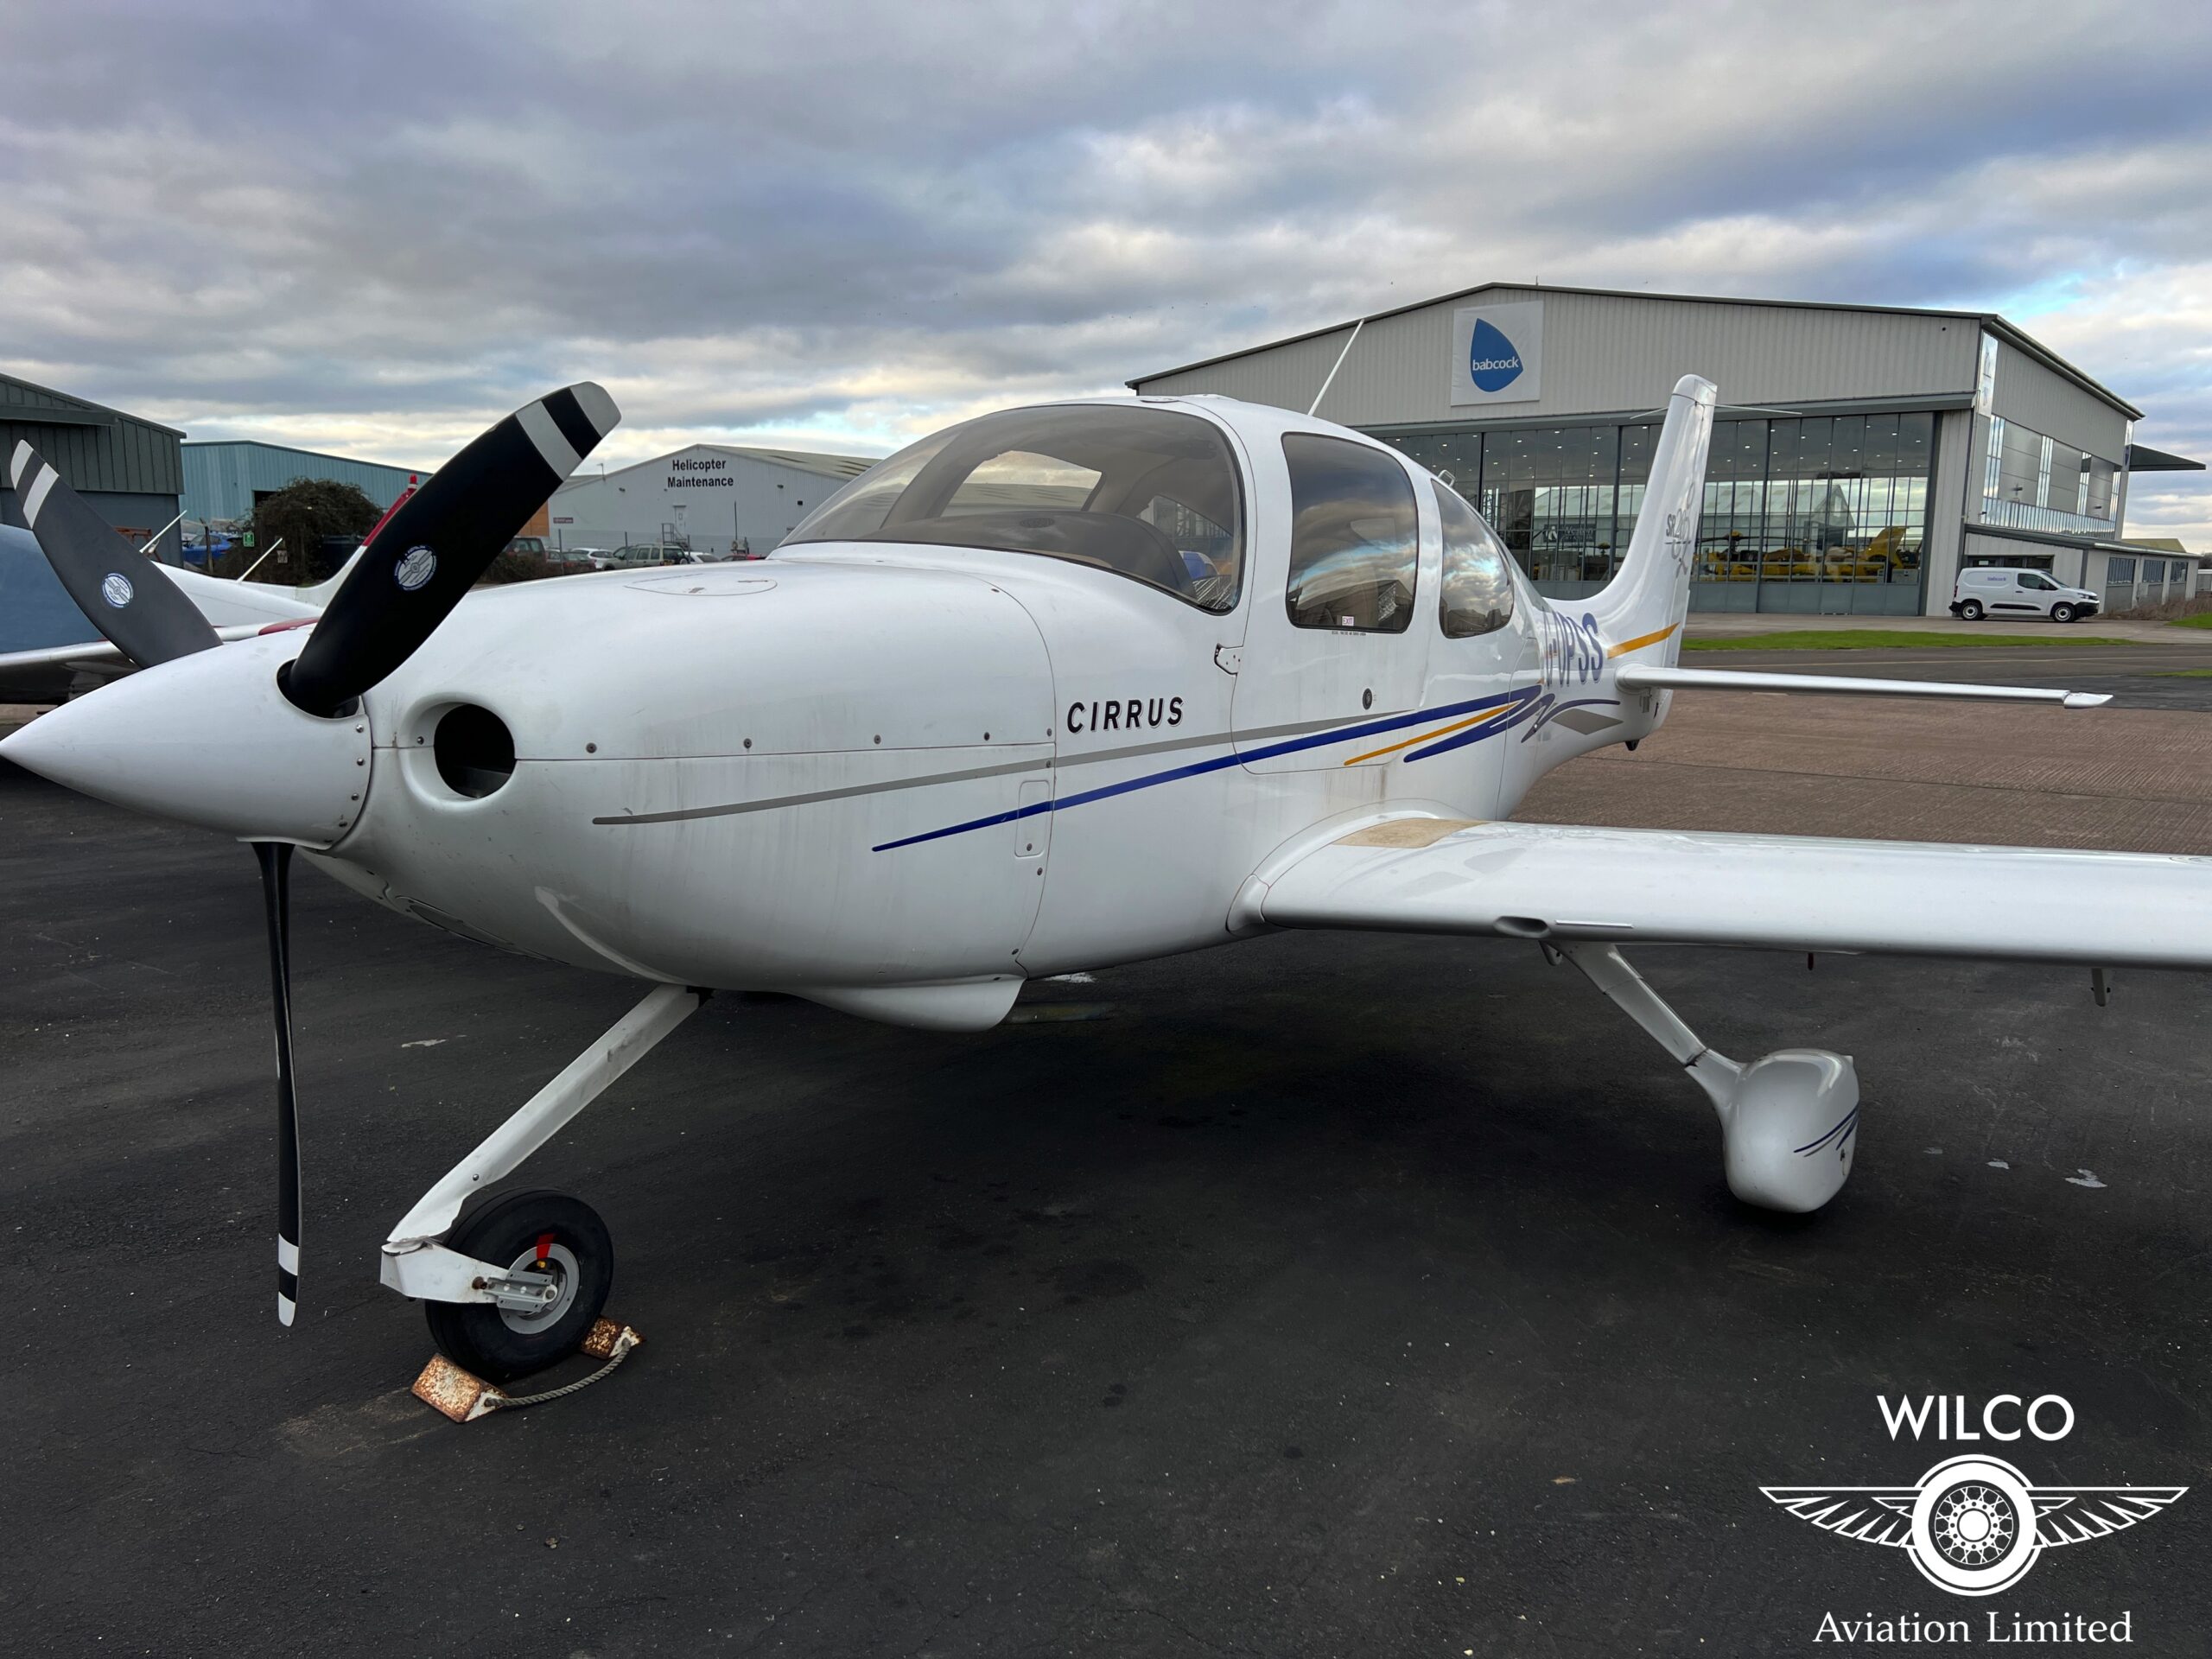 2004 Cirrus SR20 G2 Single Engine Piston Aircraft For Sale (G-OPSS) From Wilco Aviation On AvPay aircraft exterior front left